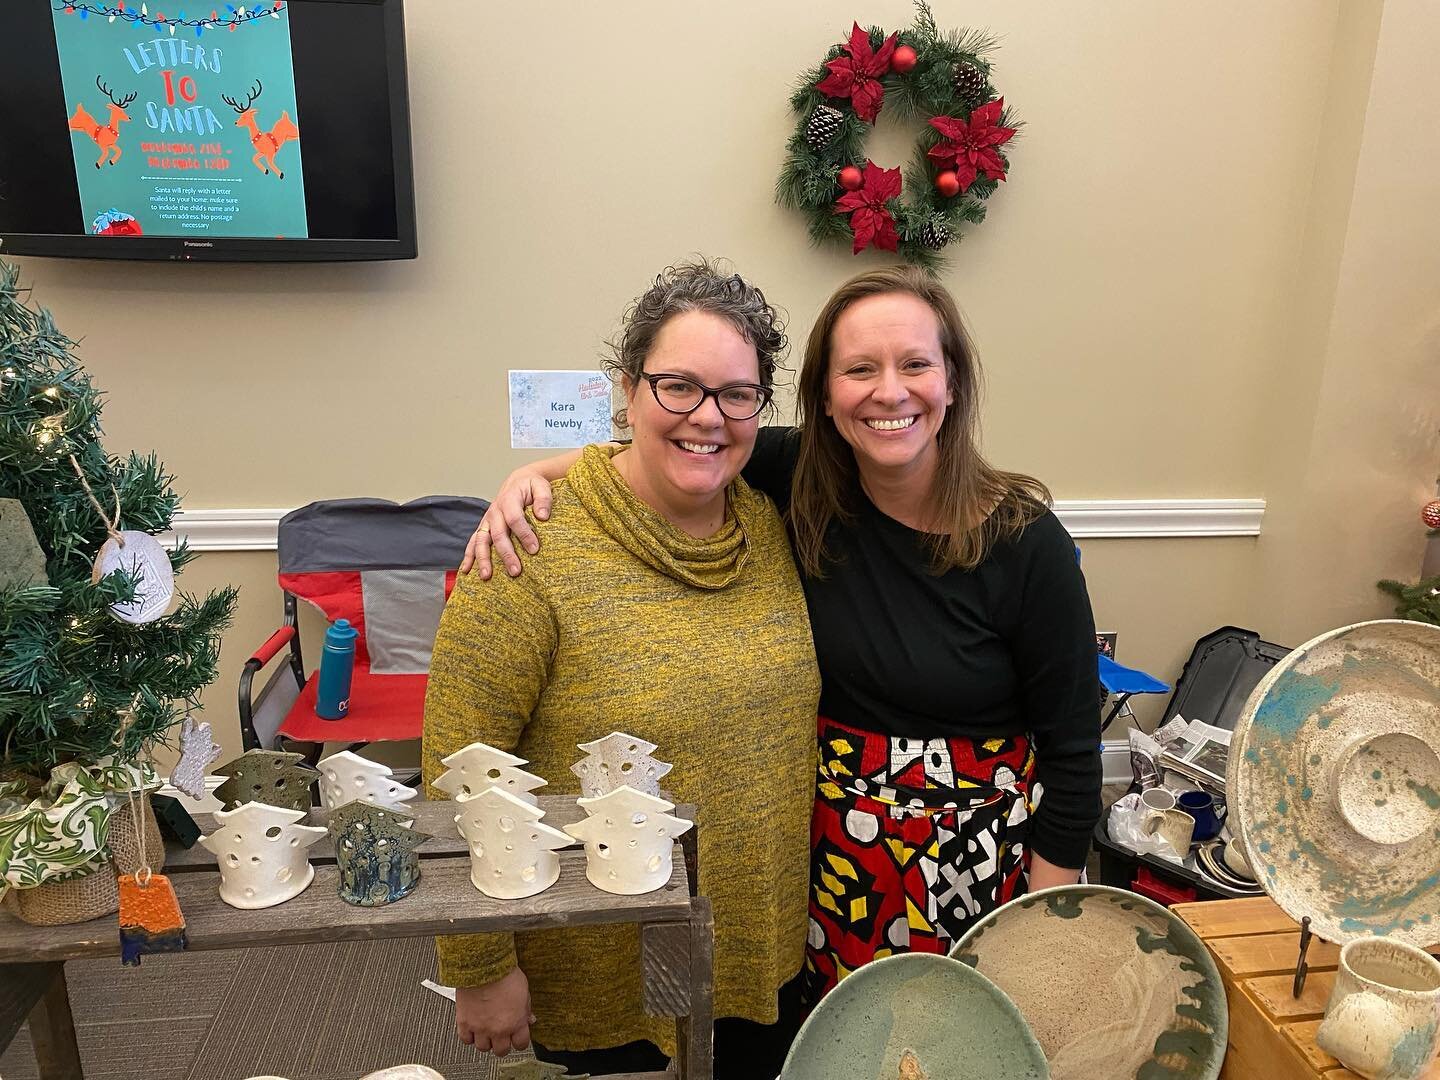 So incredibly thankful for friends who are willing to wake up and meet me at 6am to sell pottery with me all day. I feel so loved and supported. Thank you @erinub and @annecumbie. Y&rsquo;all are incredible.